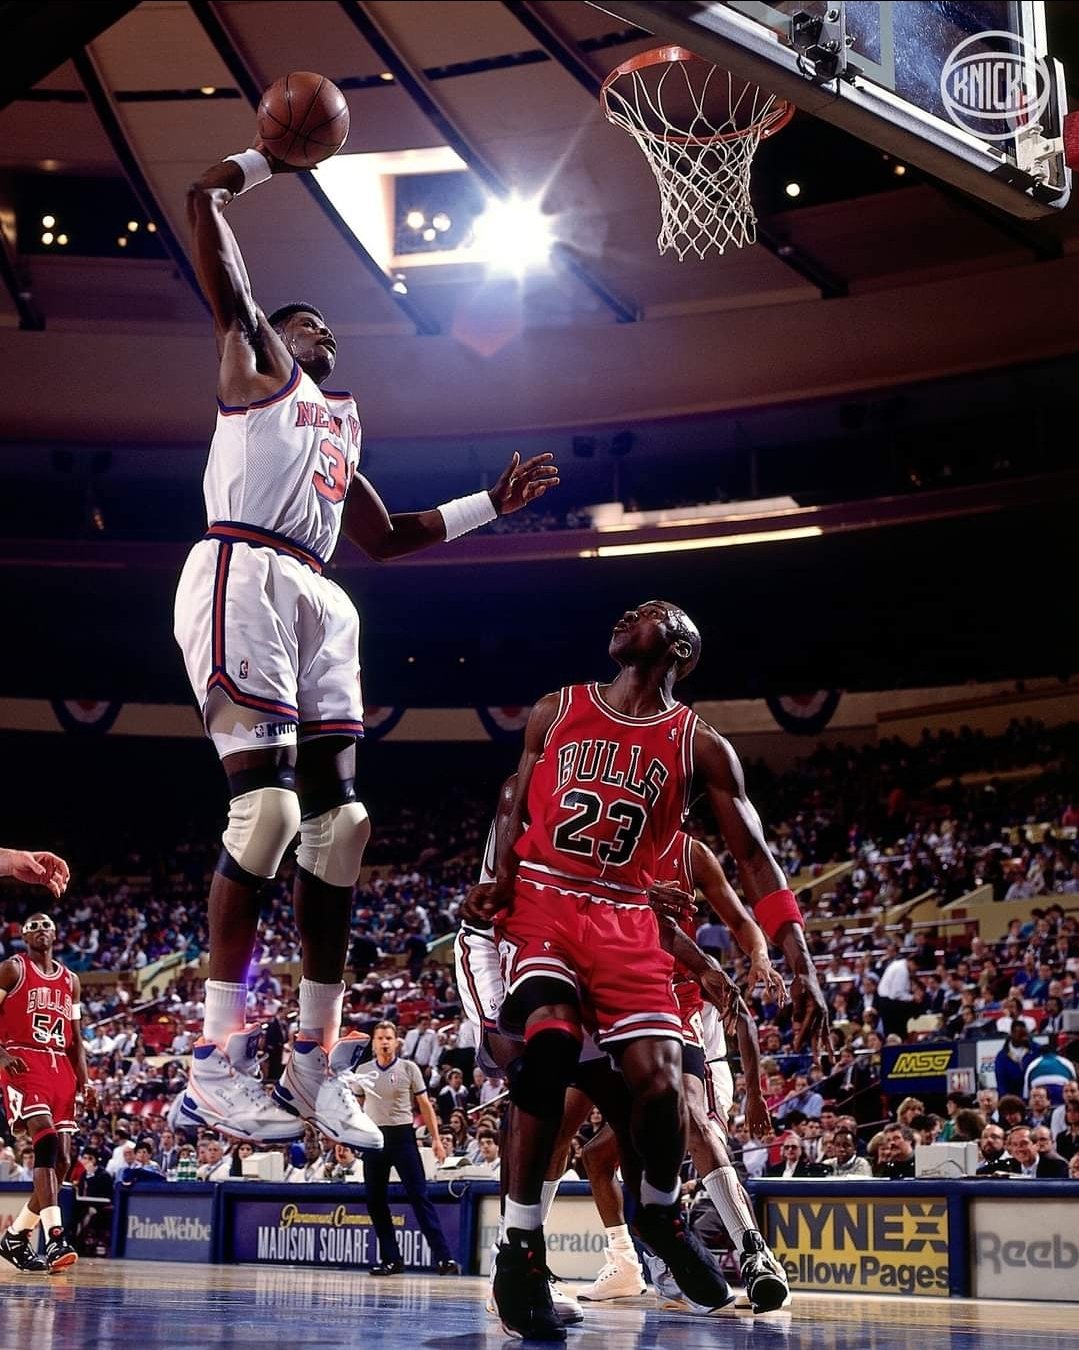 Happy birthday to our New York Knick Patrick Ewing!!! 